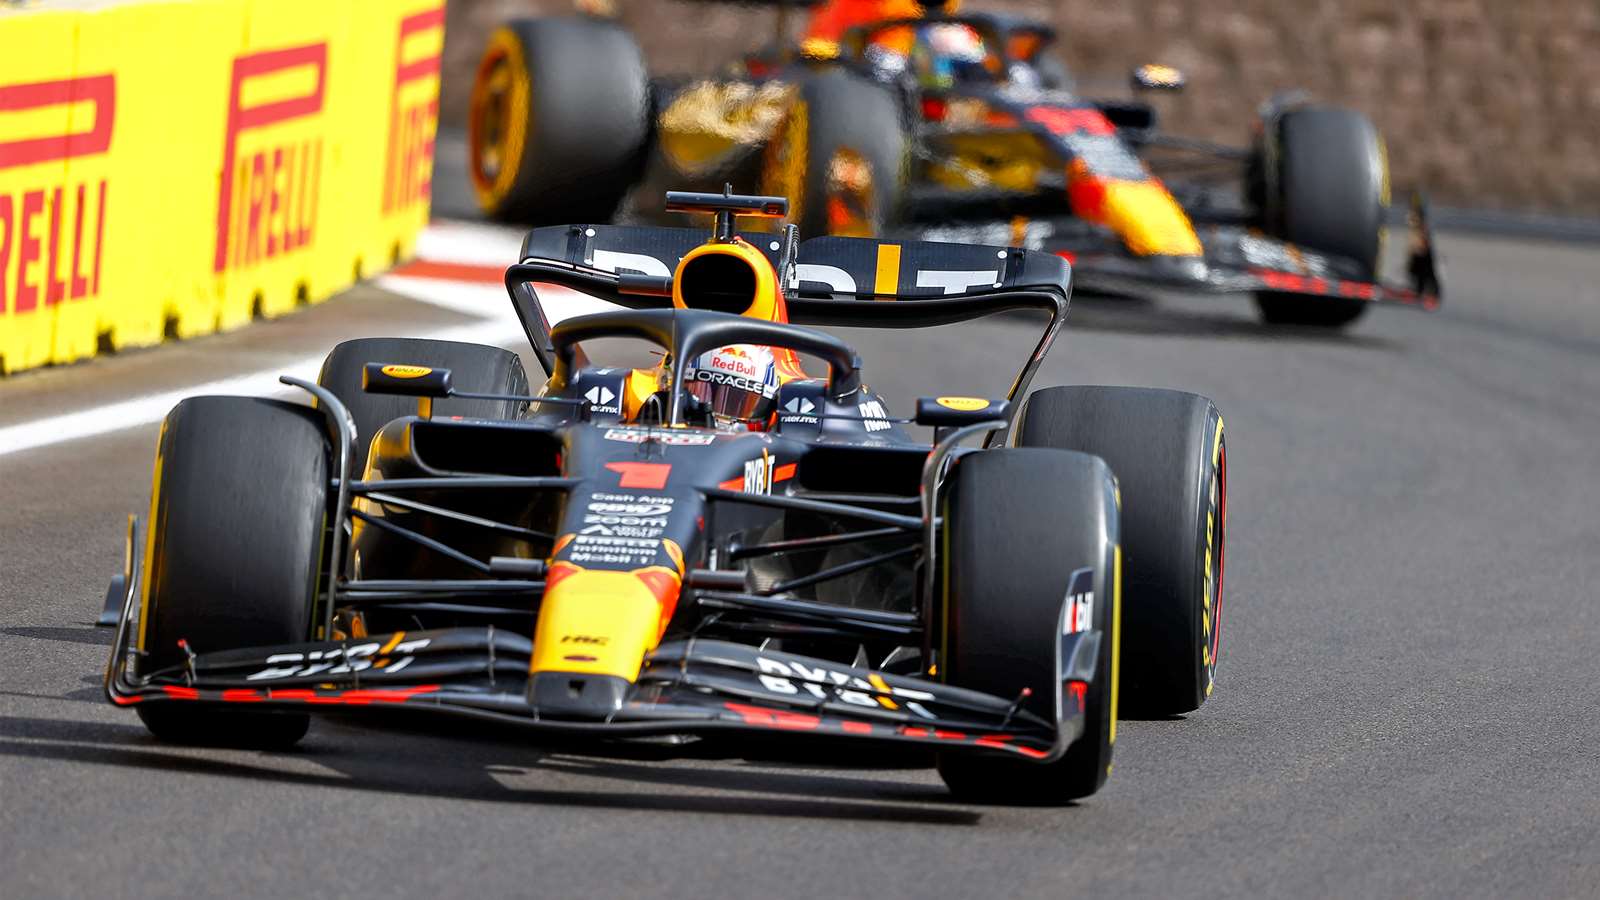 F1 needs a quick fix to stem Red Bull's dominance | GRR